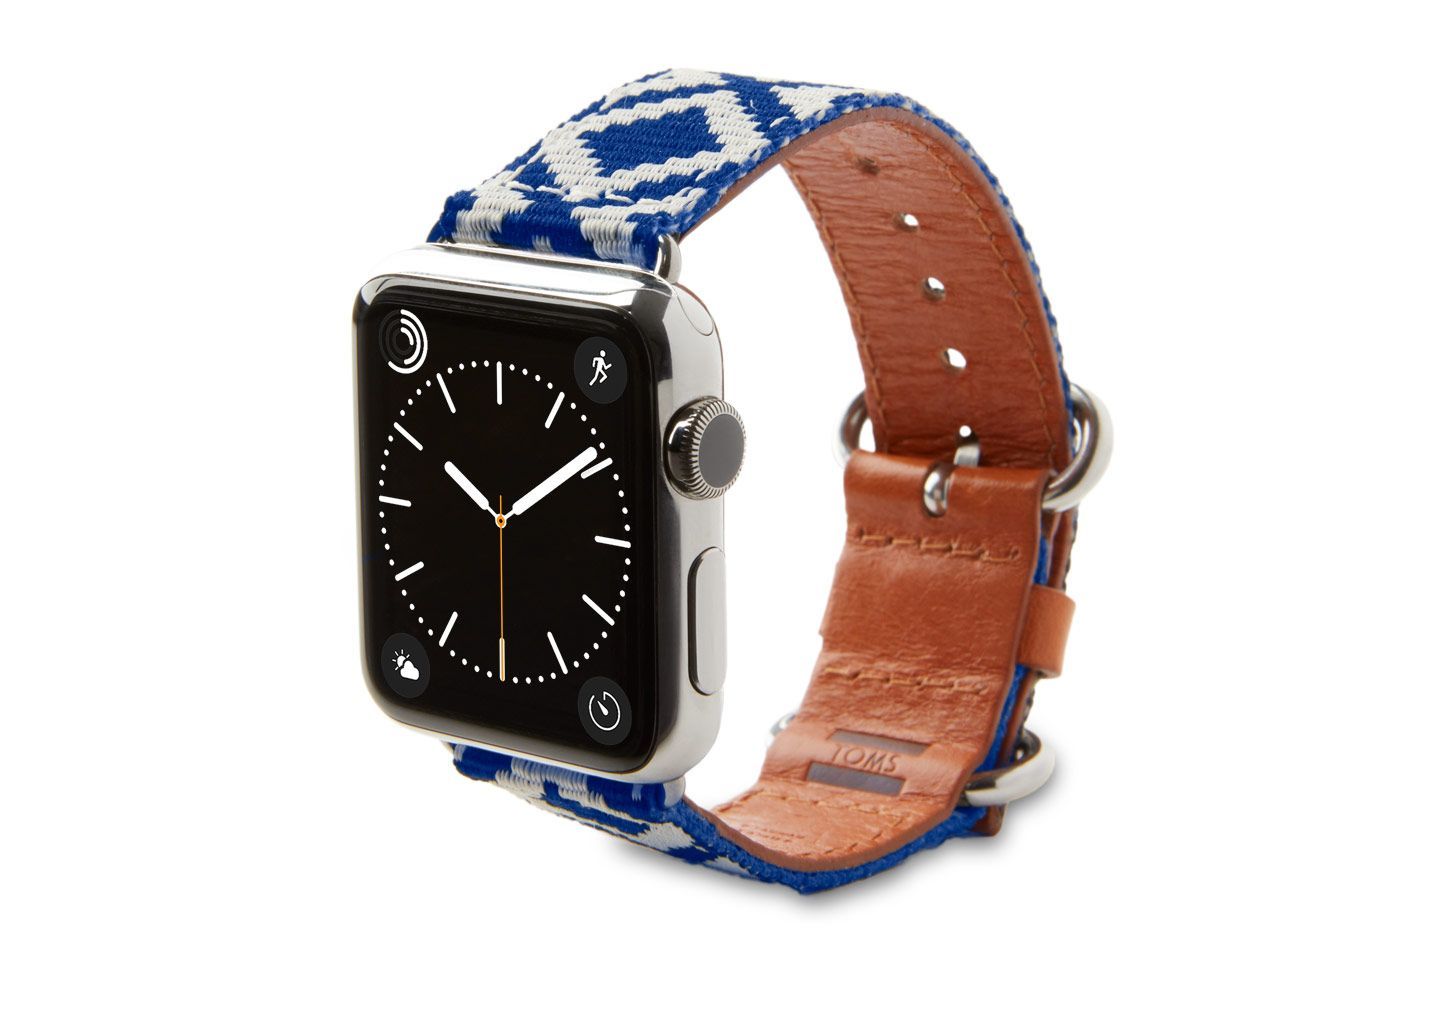 toms the hip shoemaker now makes apple watch bands for charity image 2